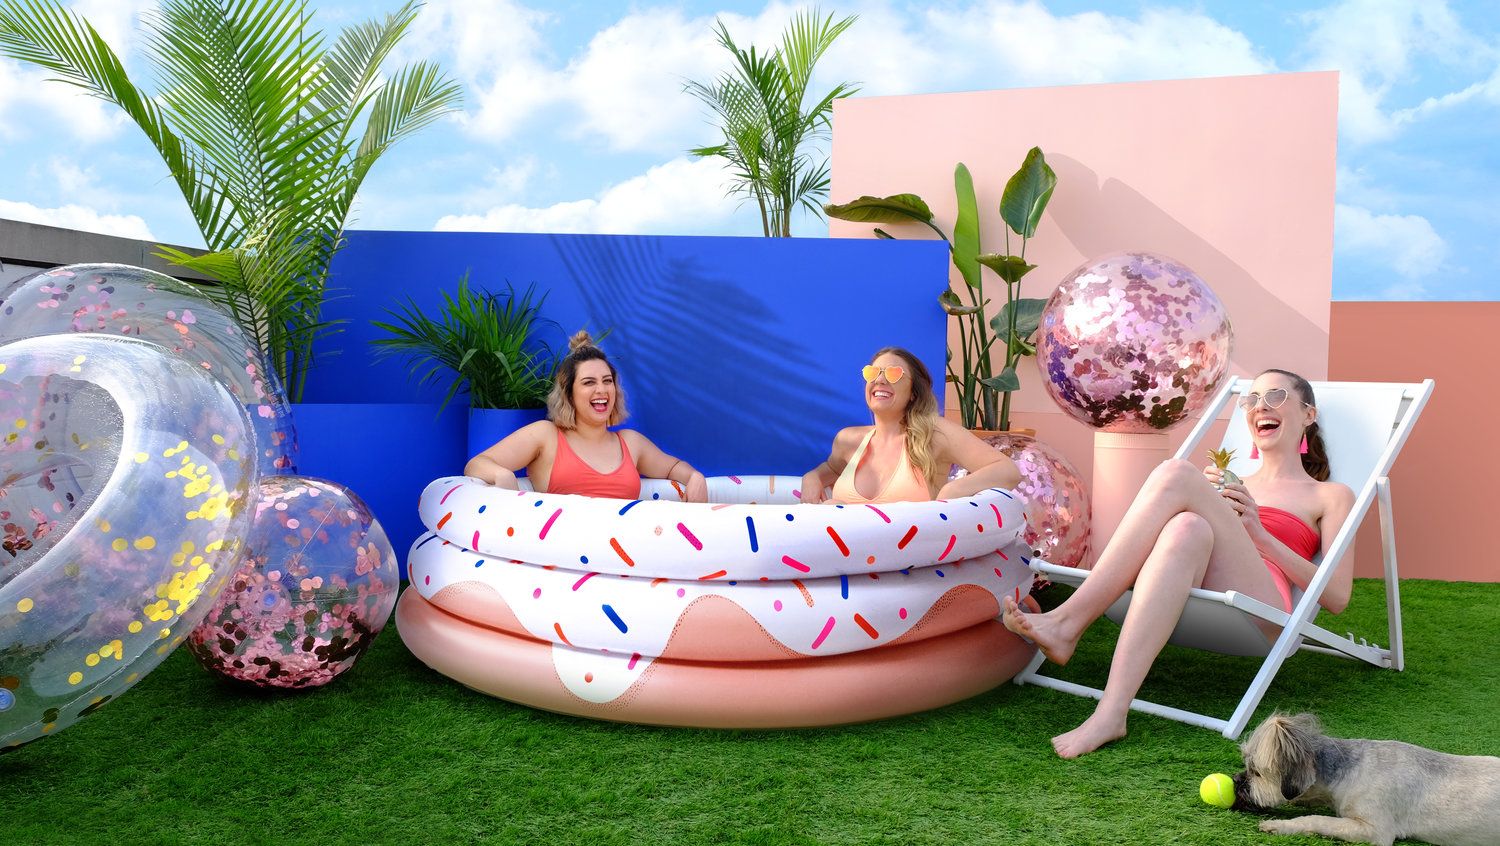 Target Is Selling Inflatable Swimming Pools That Can Fit 3 Adults